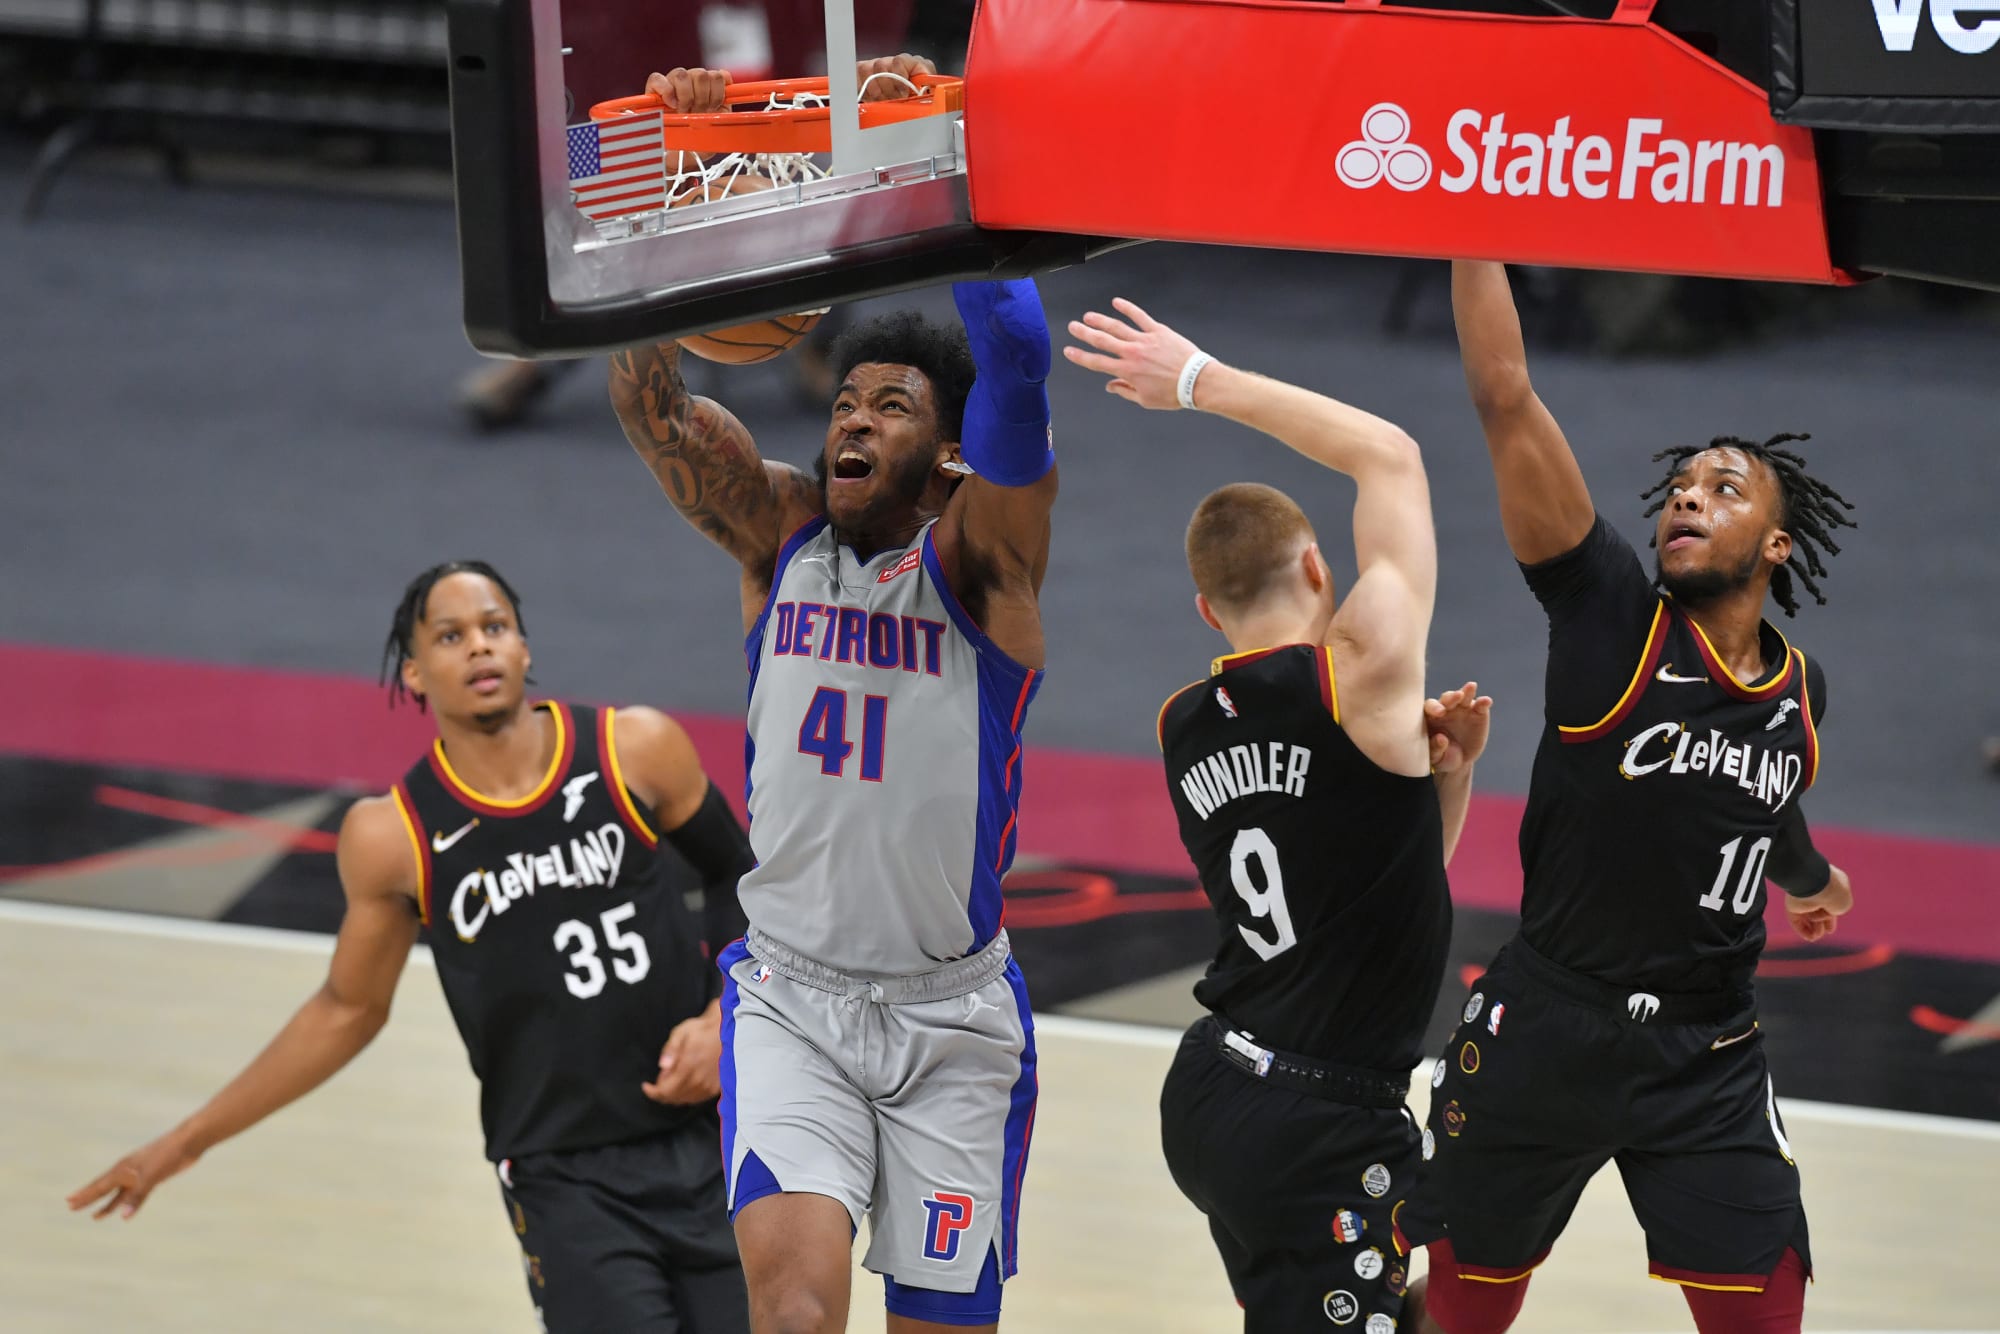 Detroit Pistons Starting lineup vs. Cavaliers will have fans excited